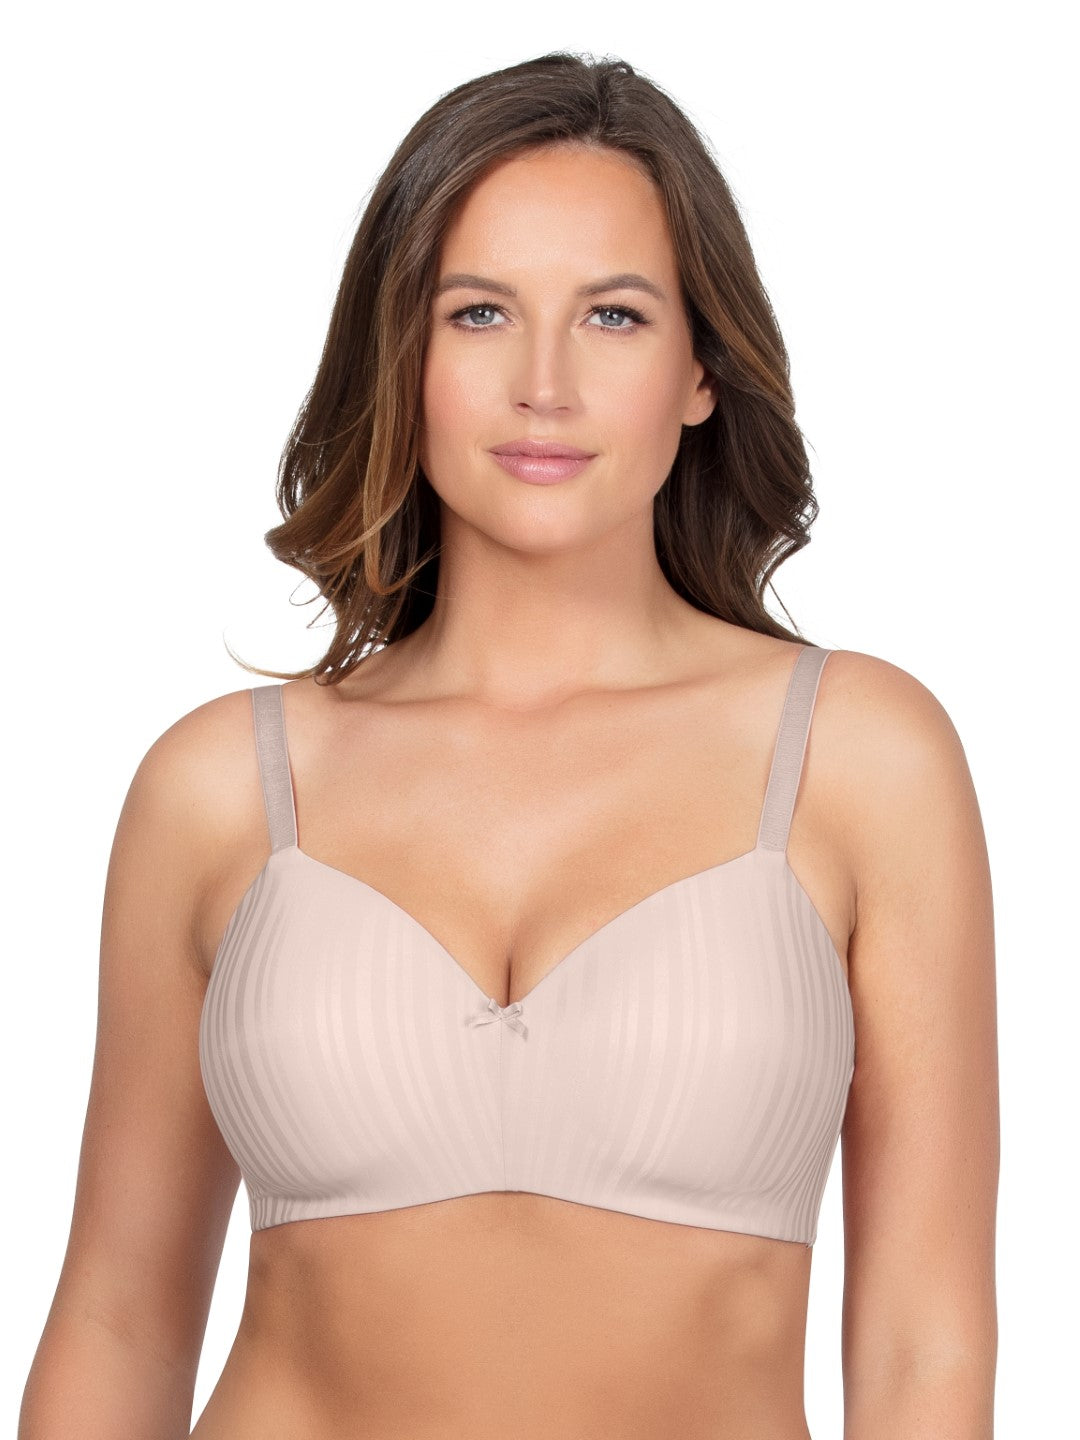 Buy Parfait Padded Regular Wired Seamless Plunge Moulded Bra